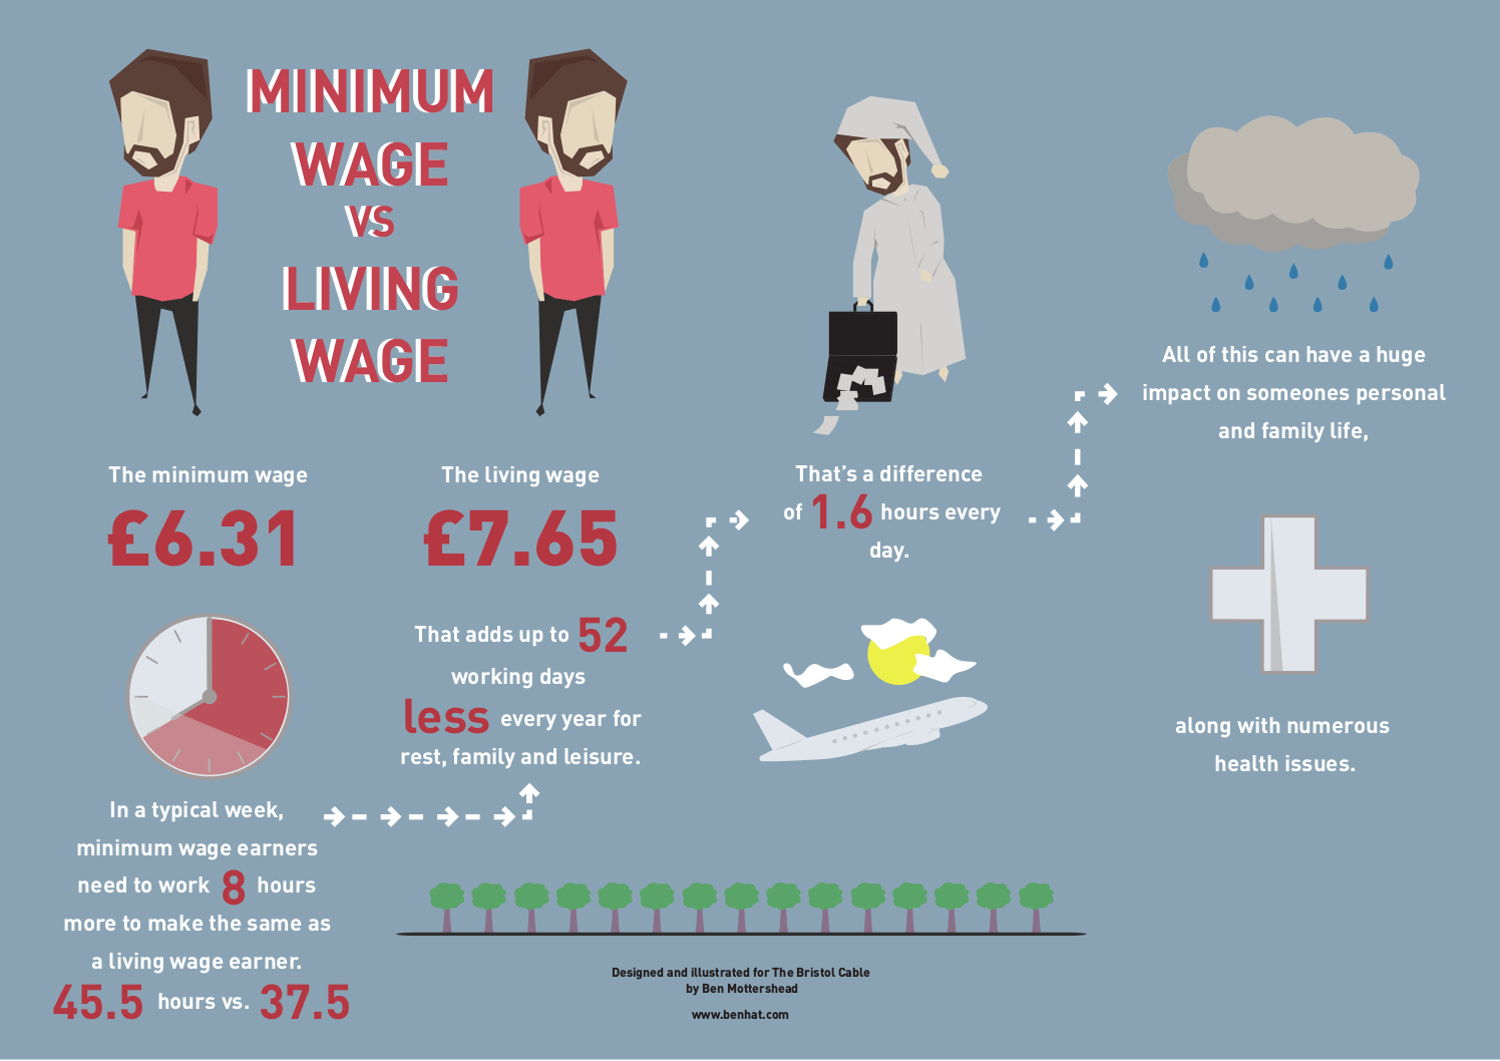 living-wage-infographic-time-and-money-the-bristol-cable